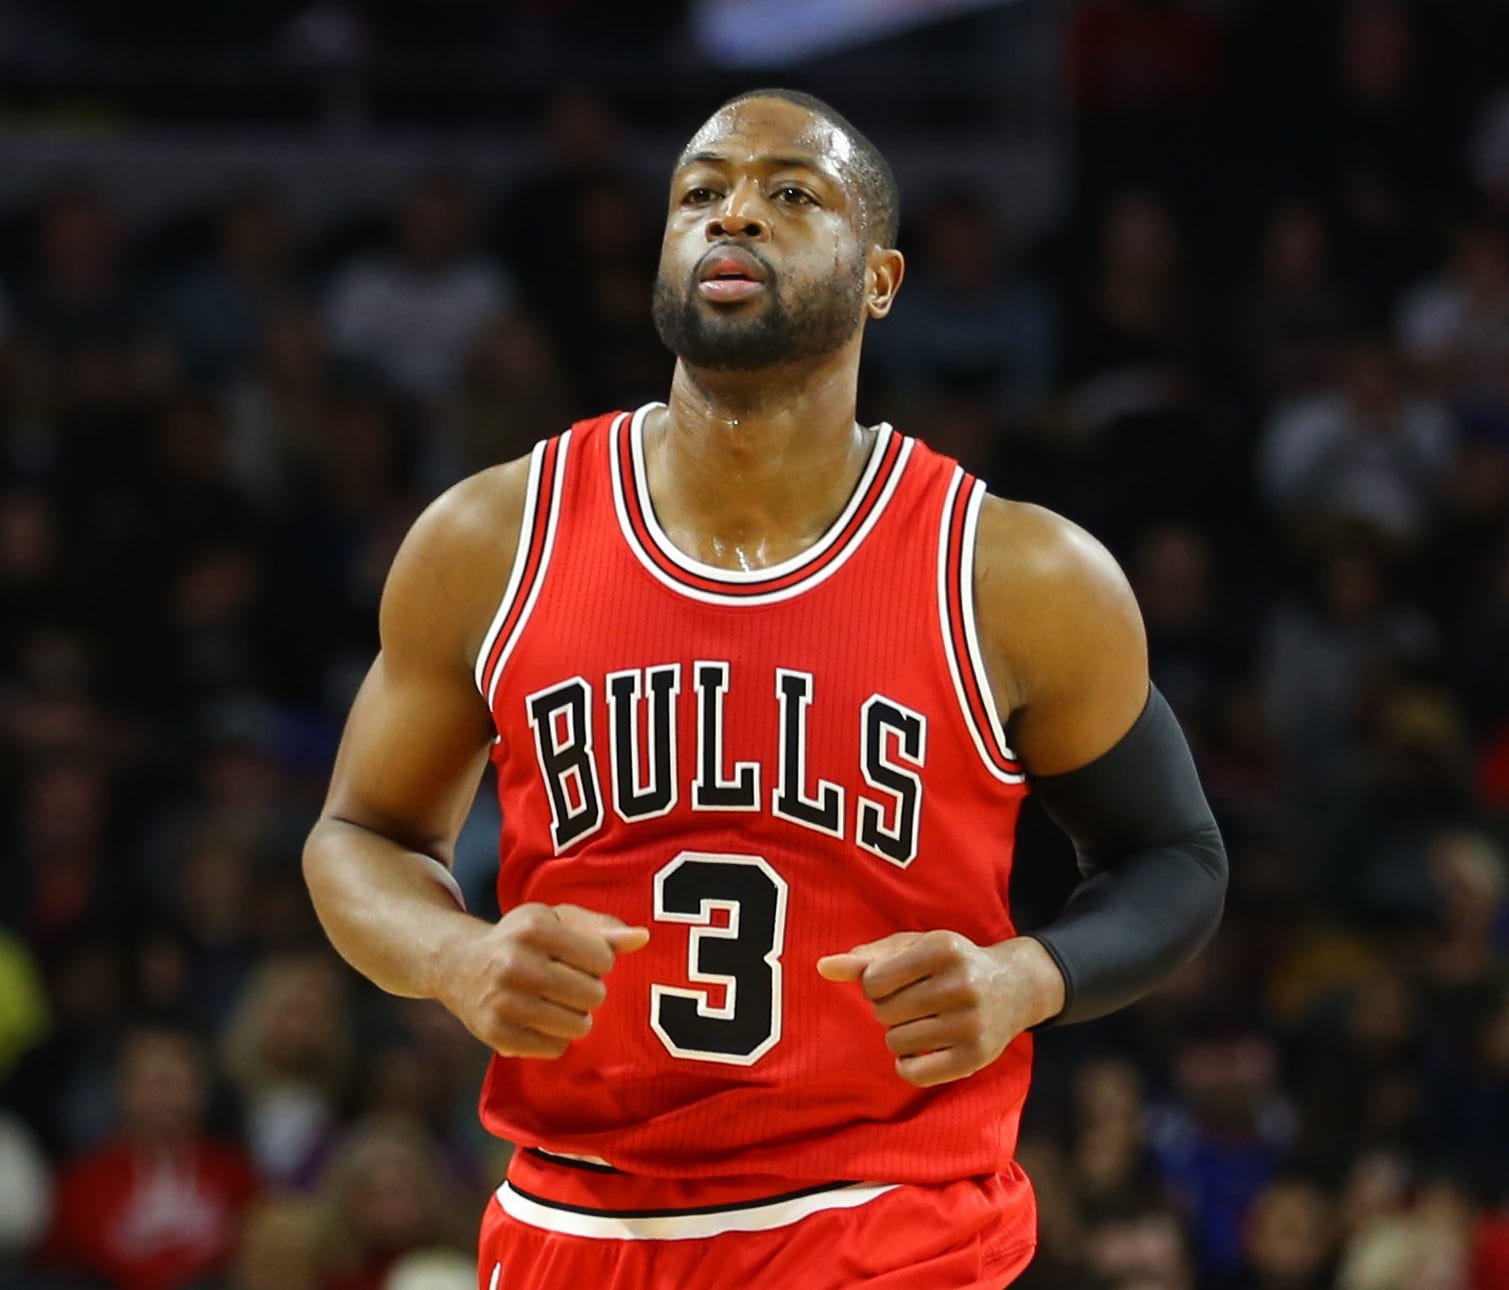 Dwyane Wade averaged 18.3 points in 60 games with the Bulls.